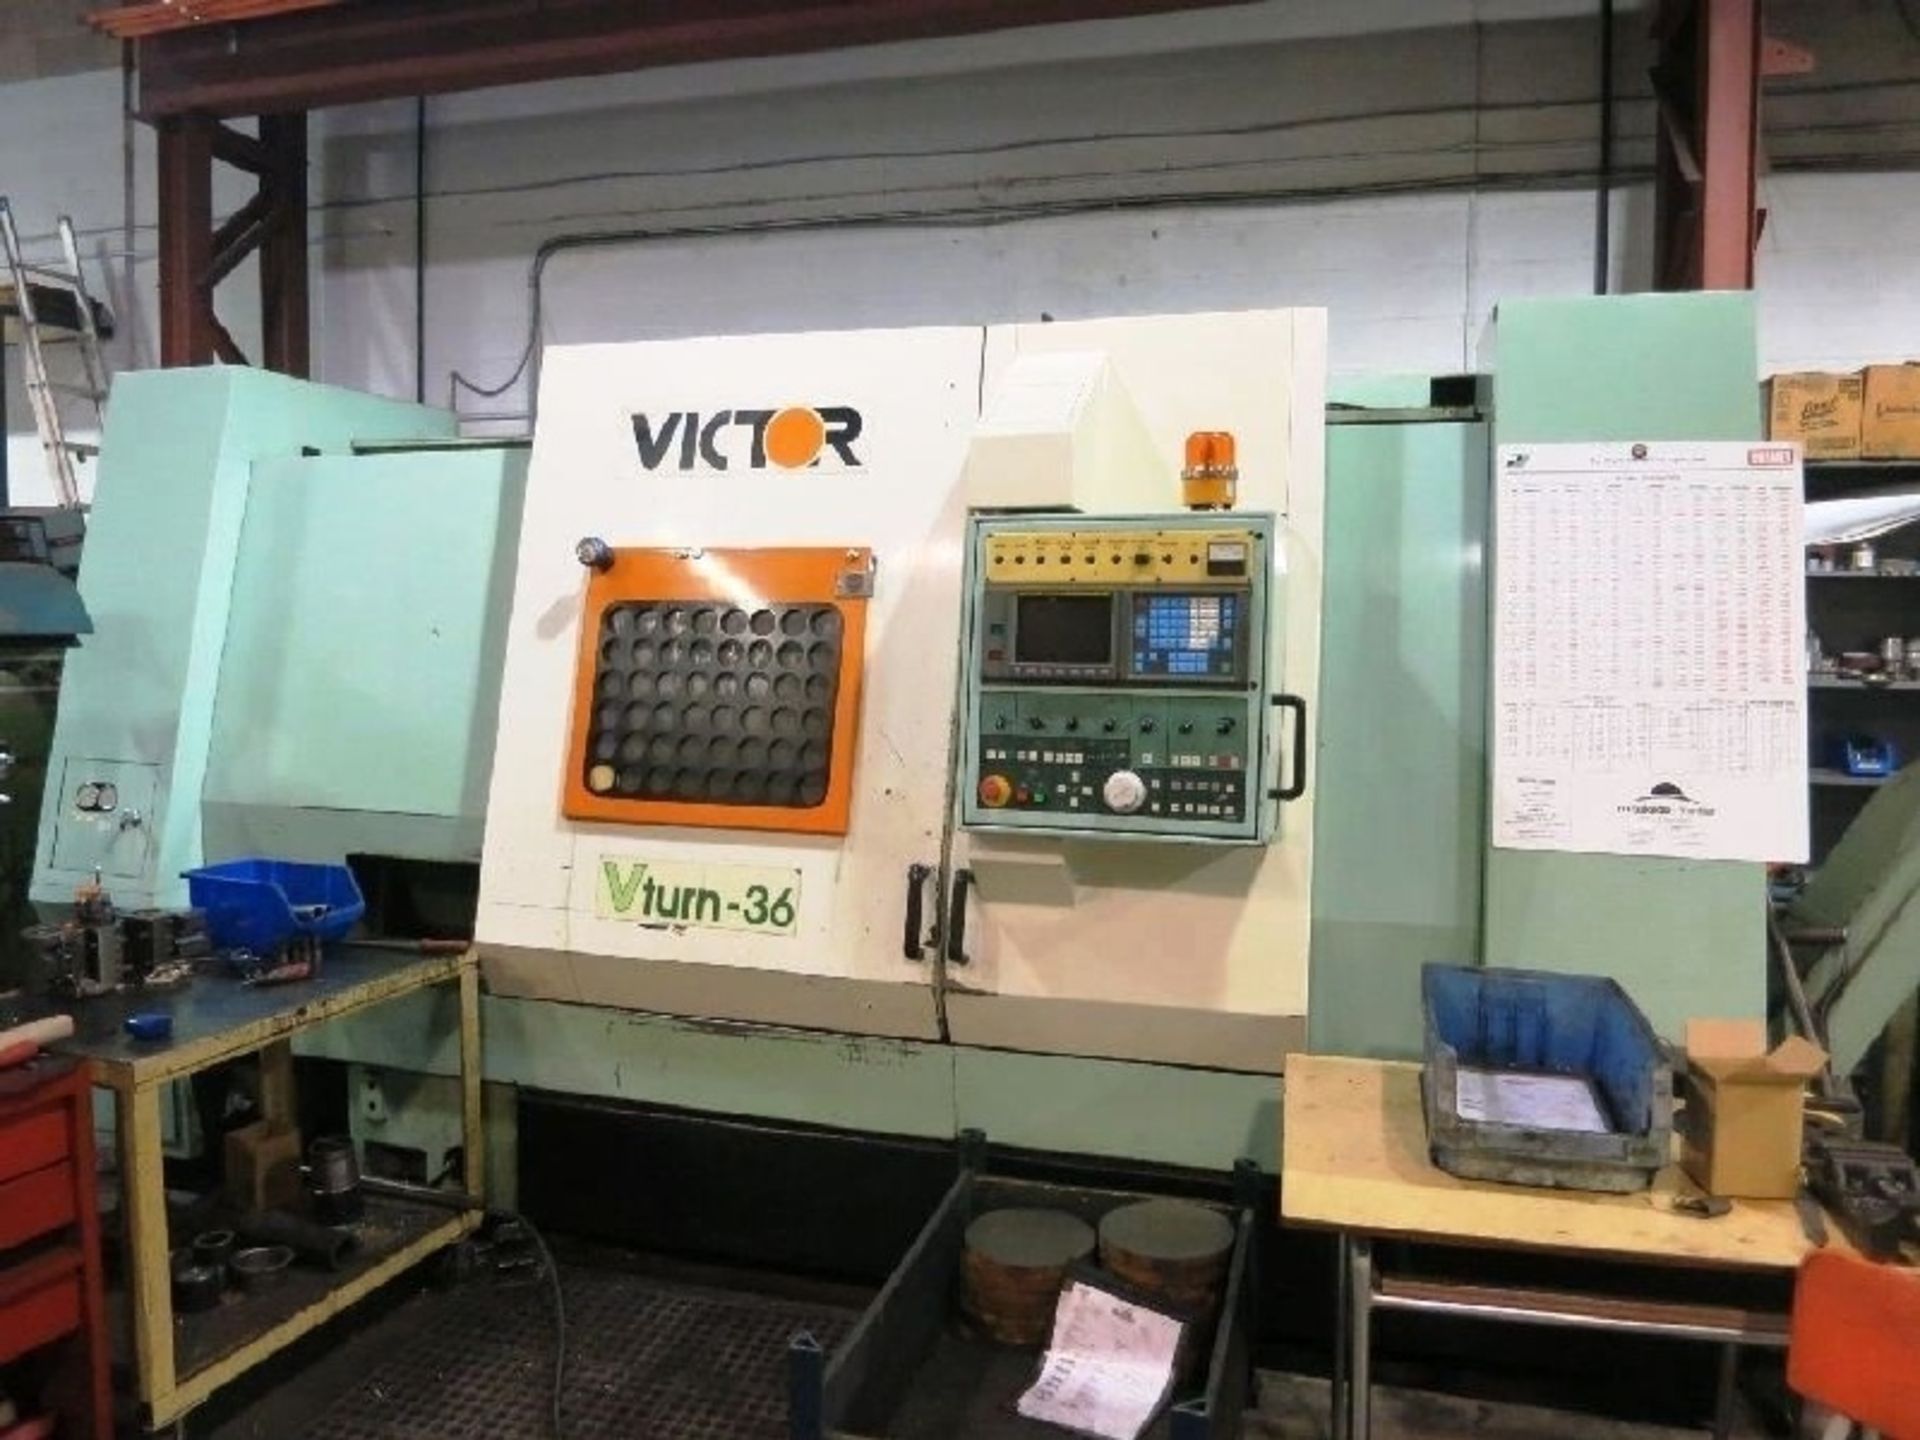 21.65" X 42.1" VICTOR (FORTUNE) MDL VTURN-36 2-AXIS CNC TURNING CENTER LATHE, S/N MD-1185, NEW - Image 5 of 10